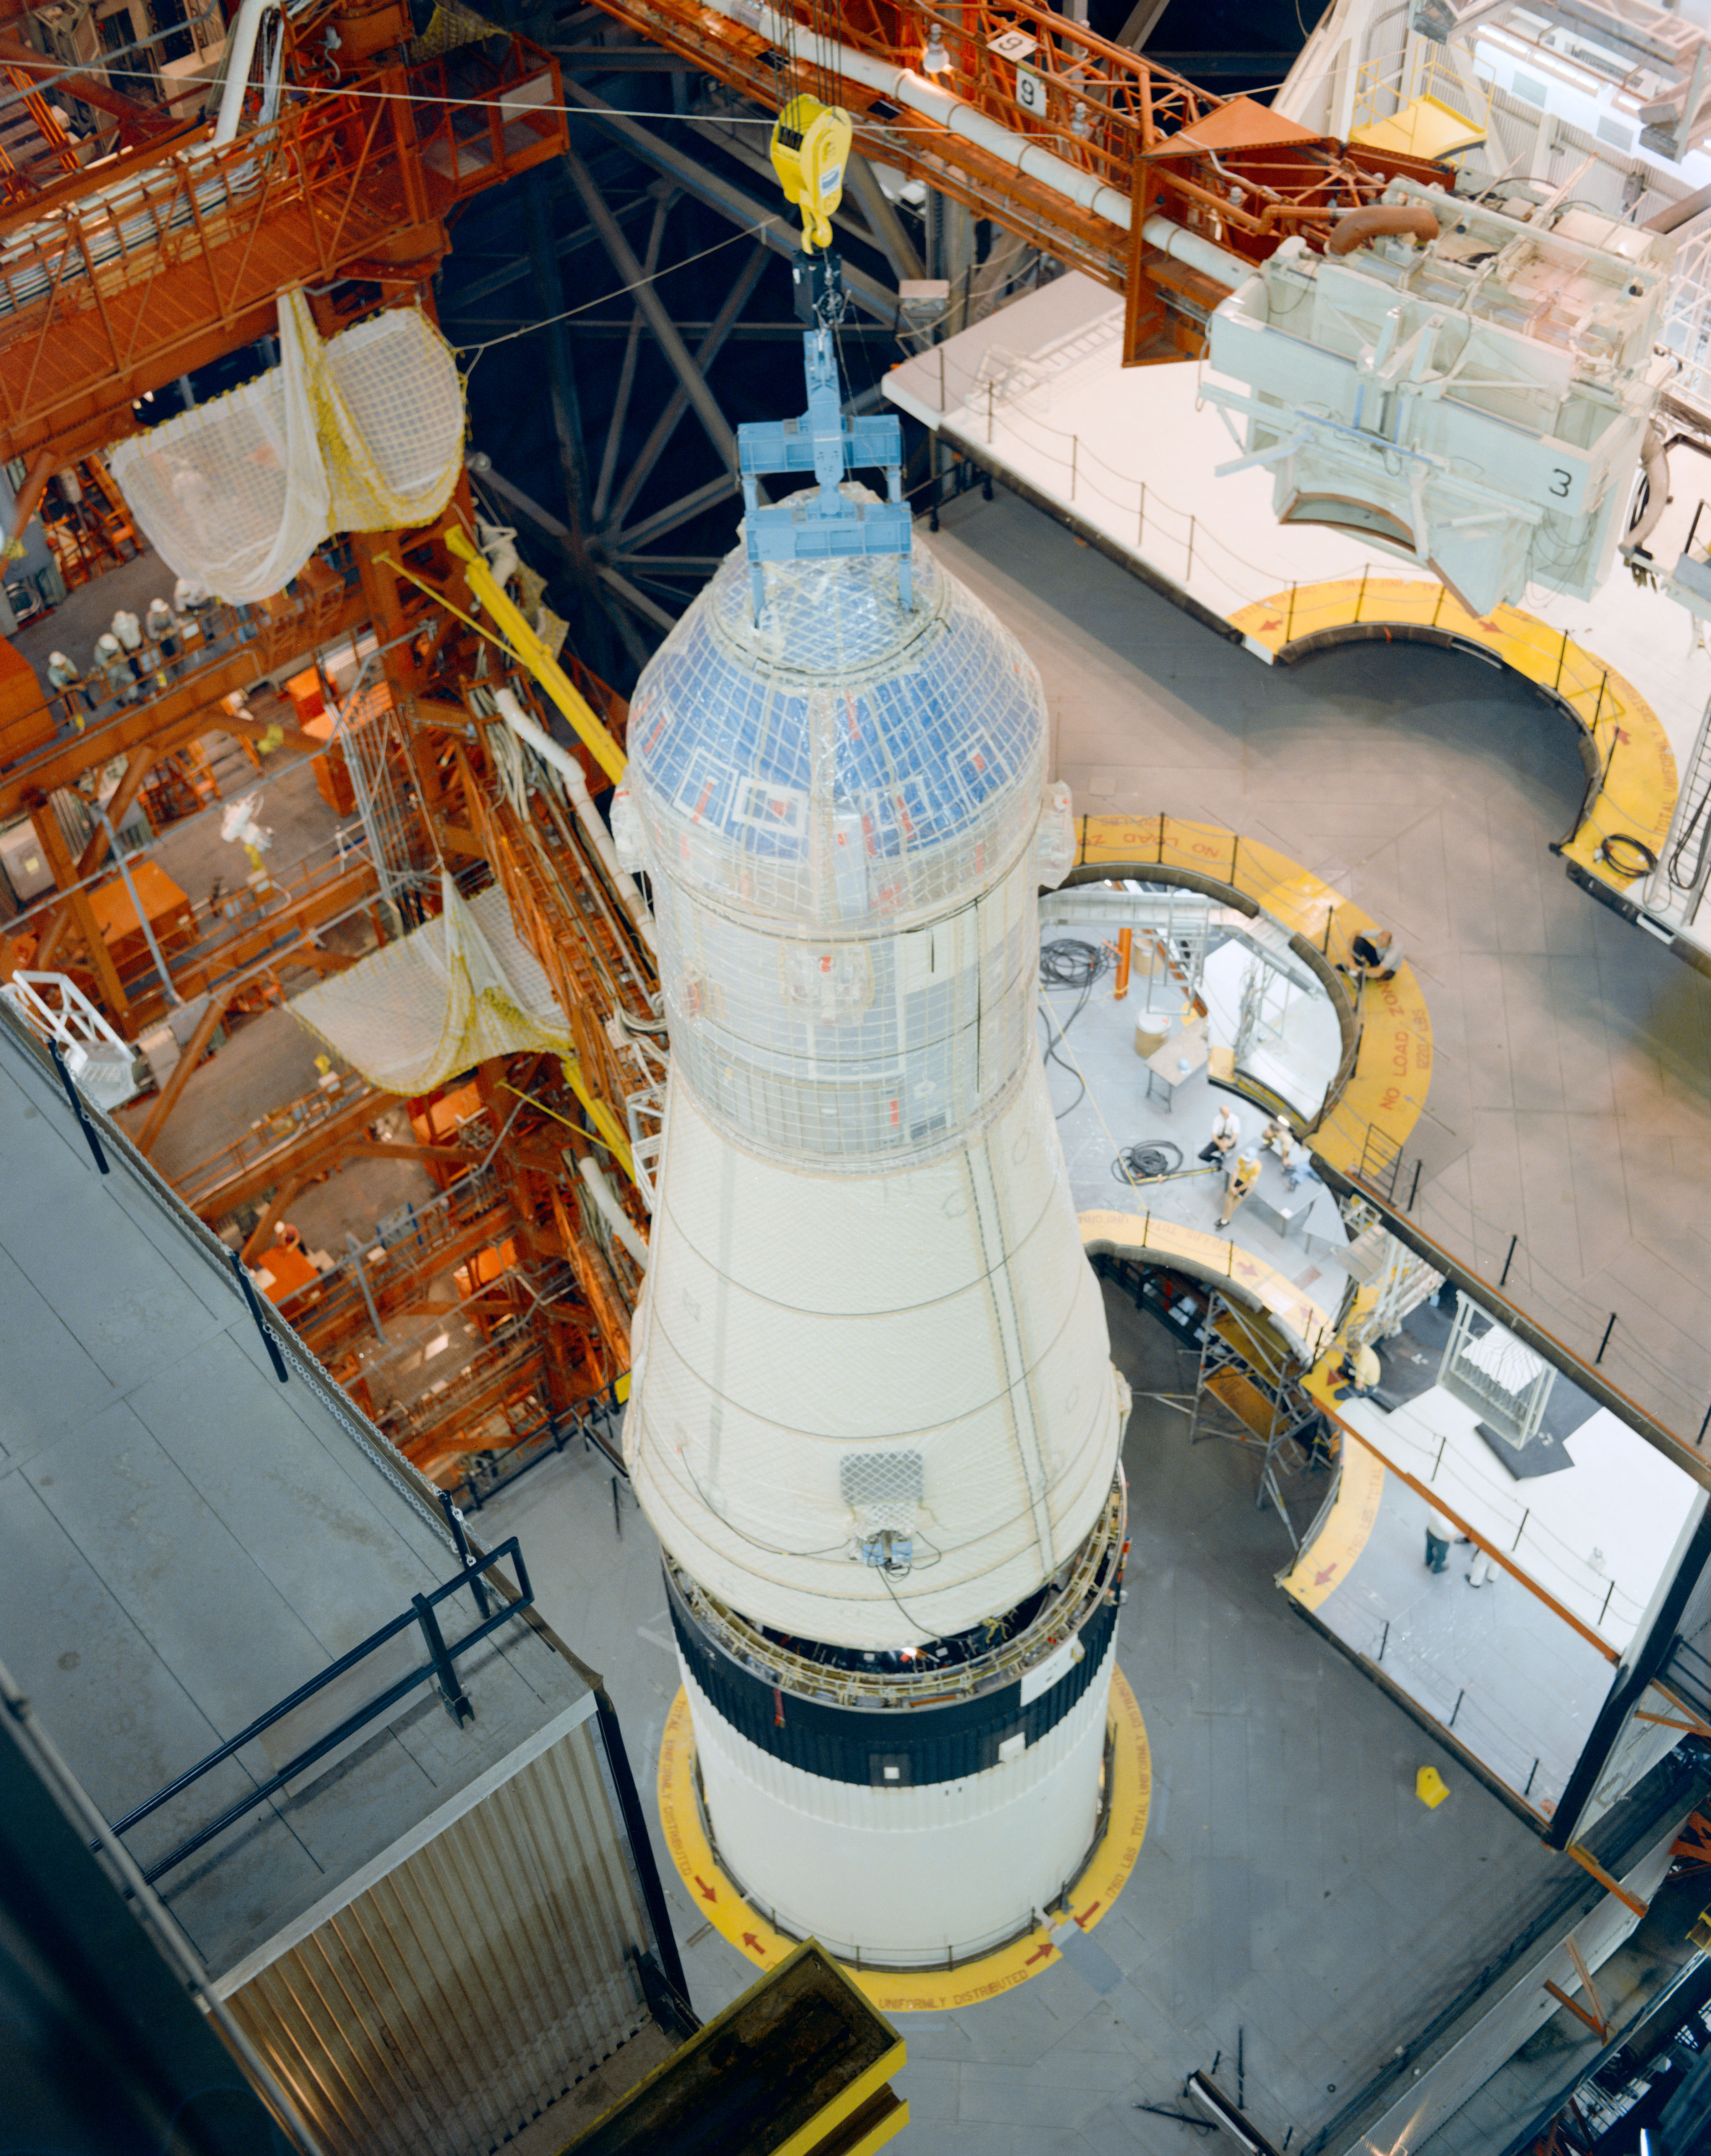 In KSC’s Vehicle Assembly Building, workers lower the Apollo 11 spacecraft onto its Saturn V rocket